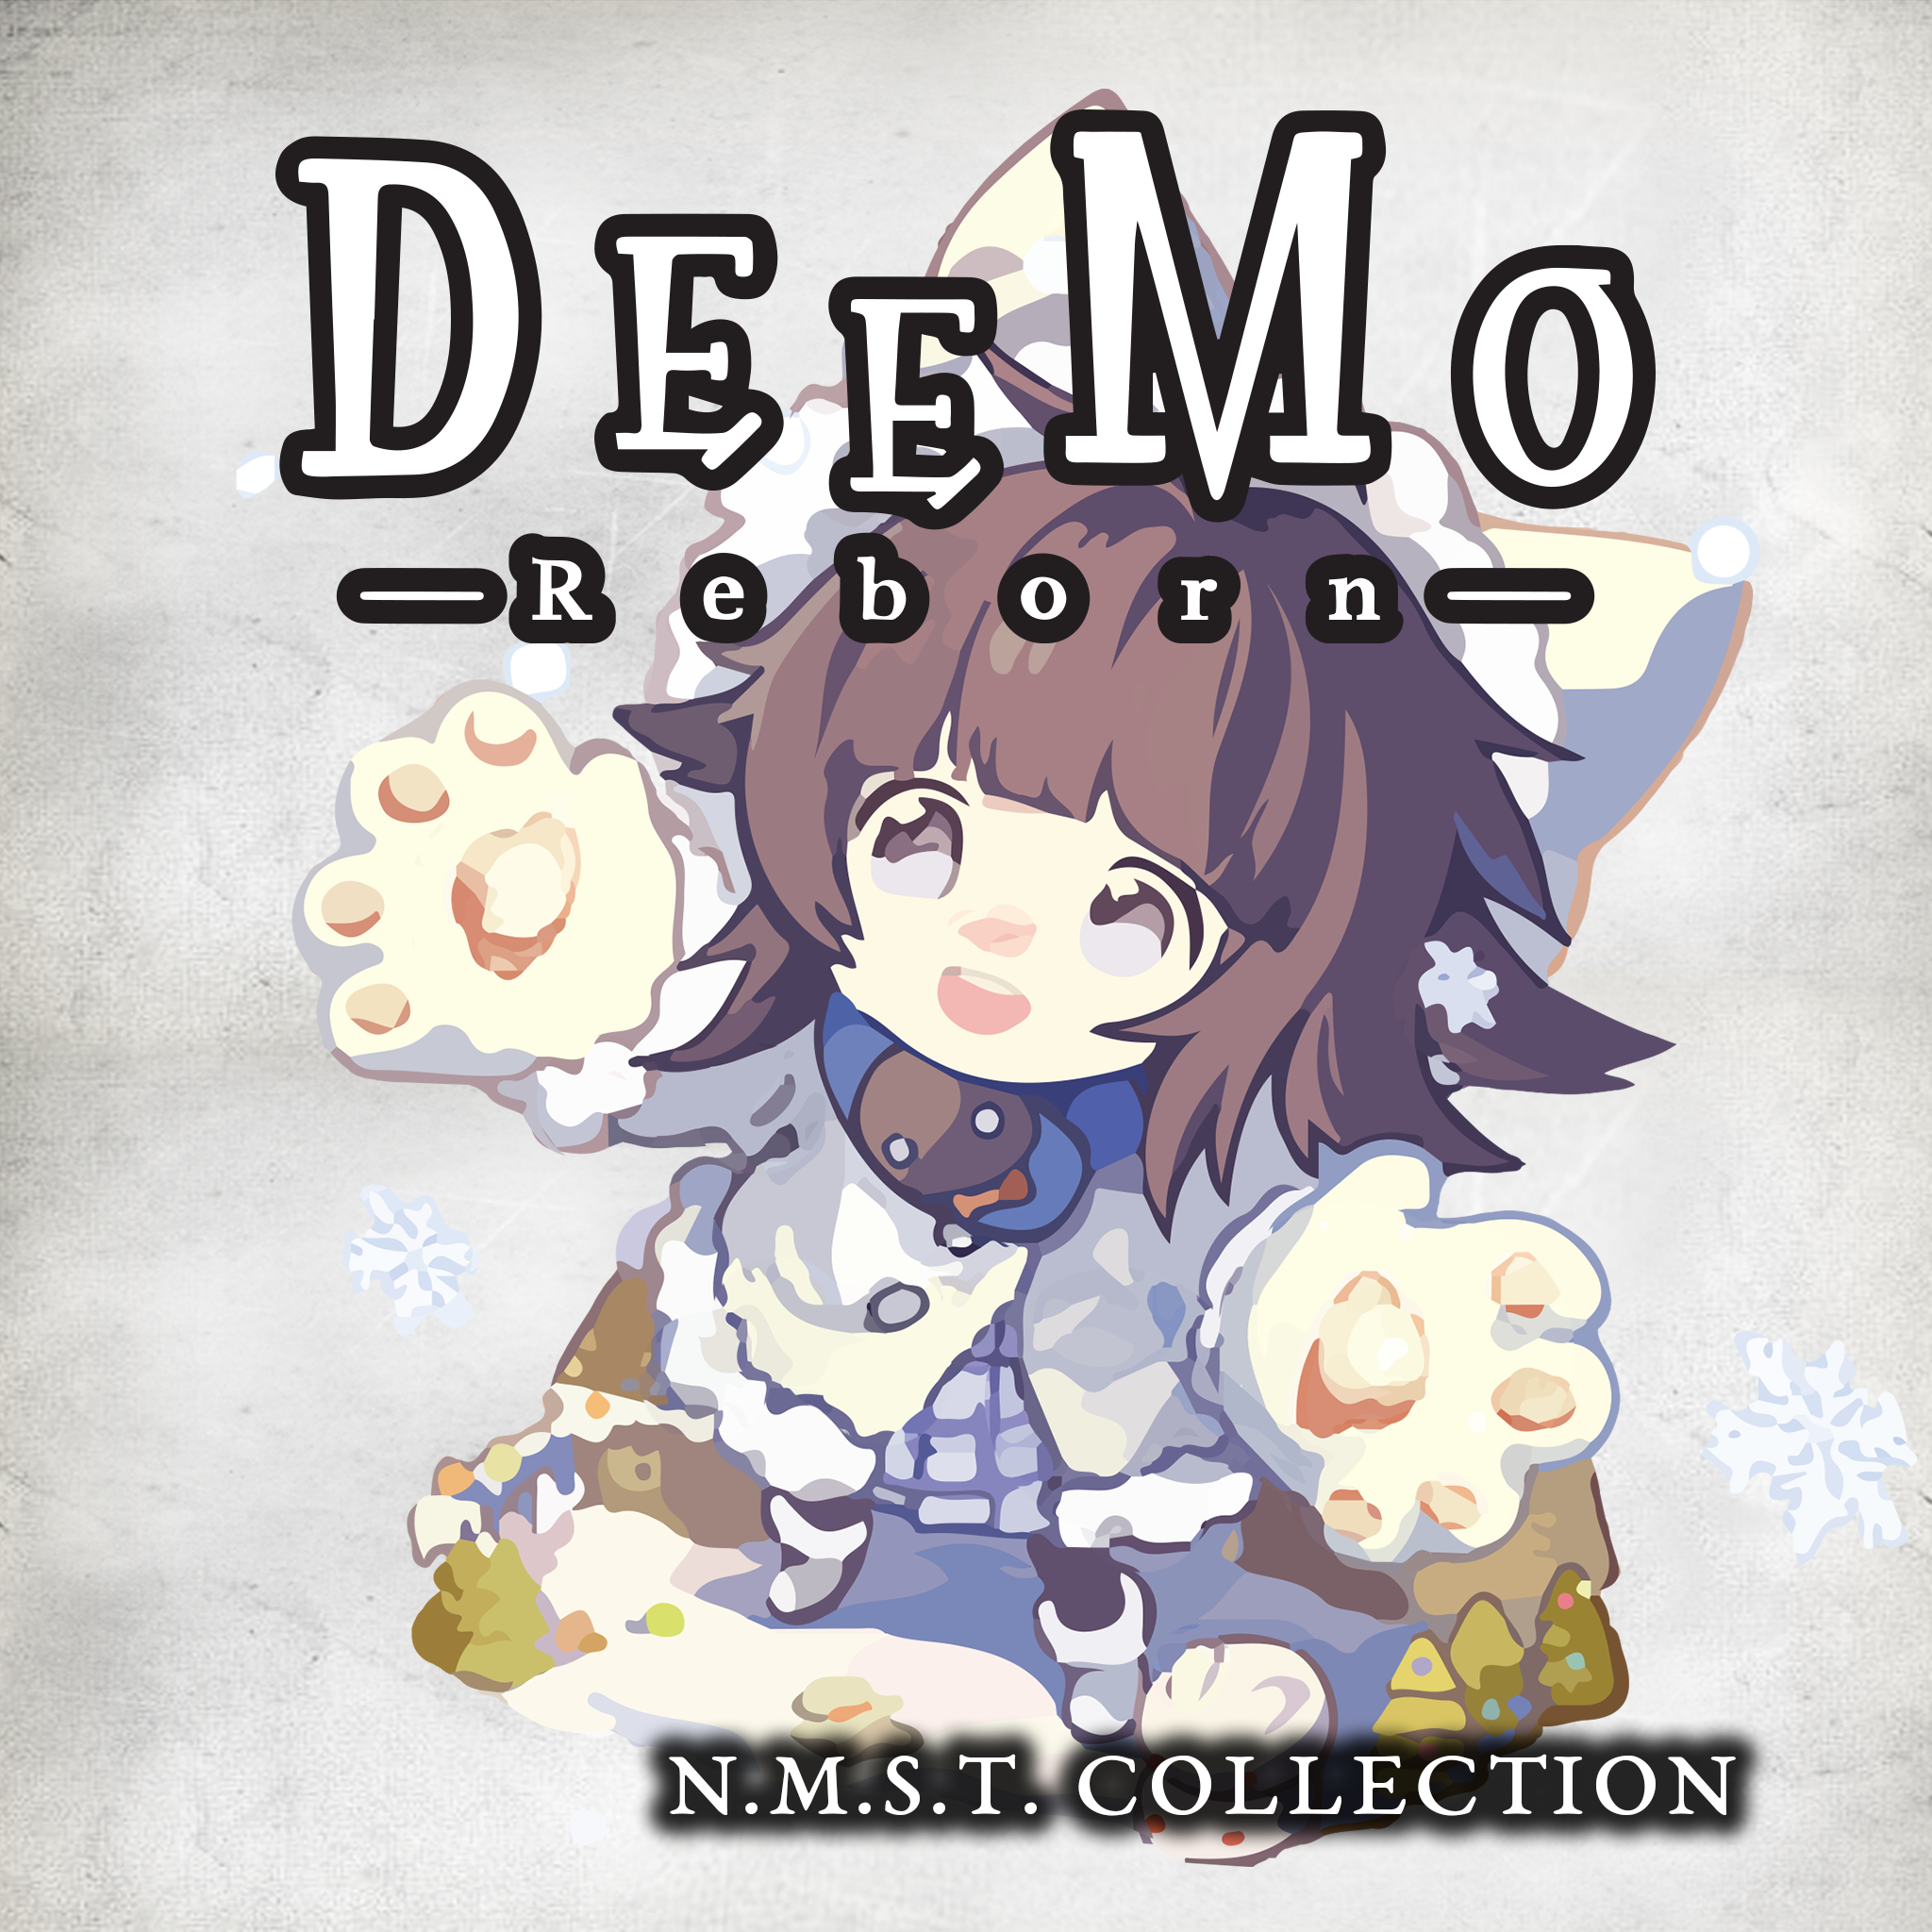 DEEMO -Reborn- N.M.S.T. Collection